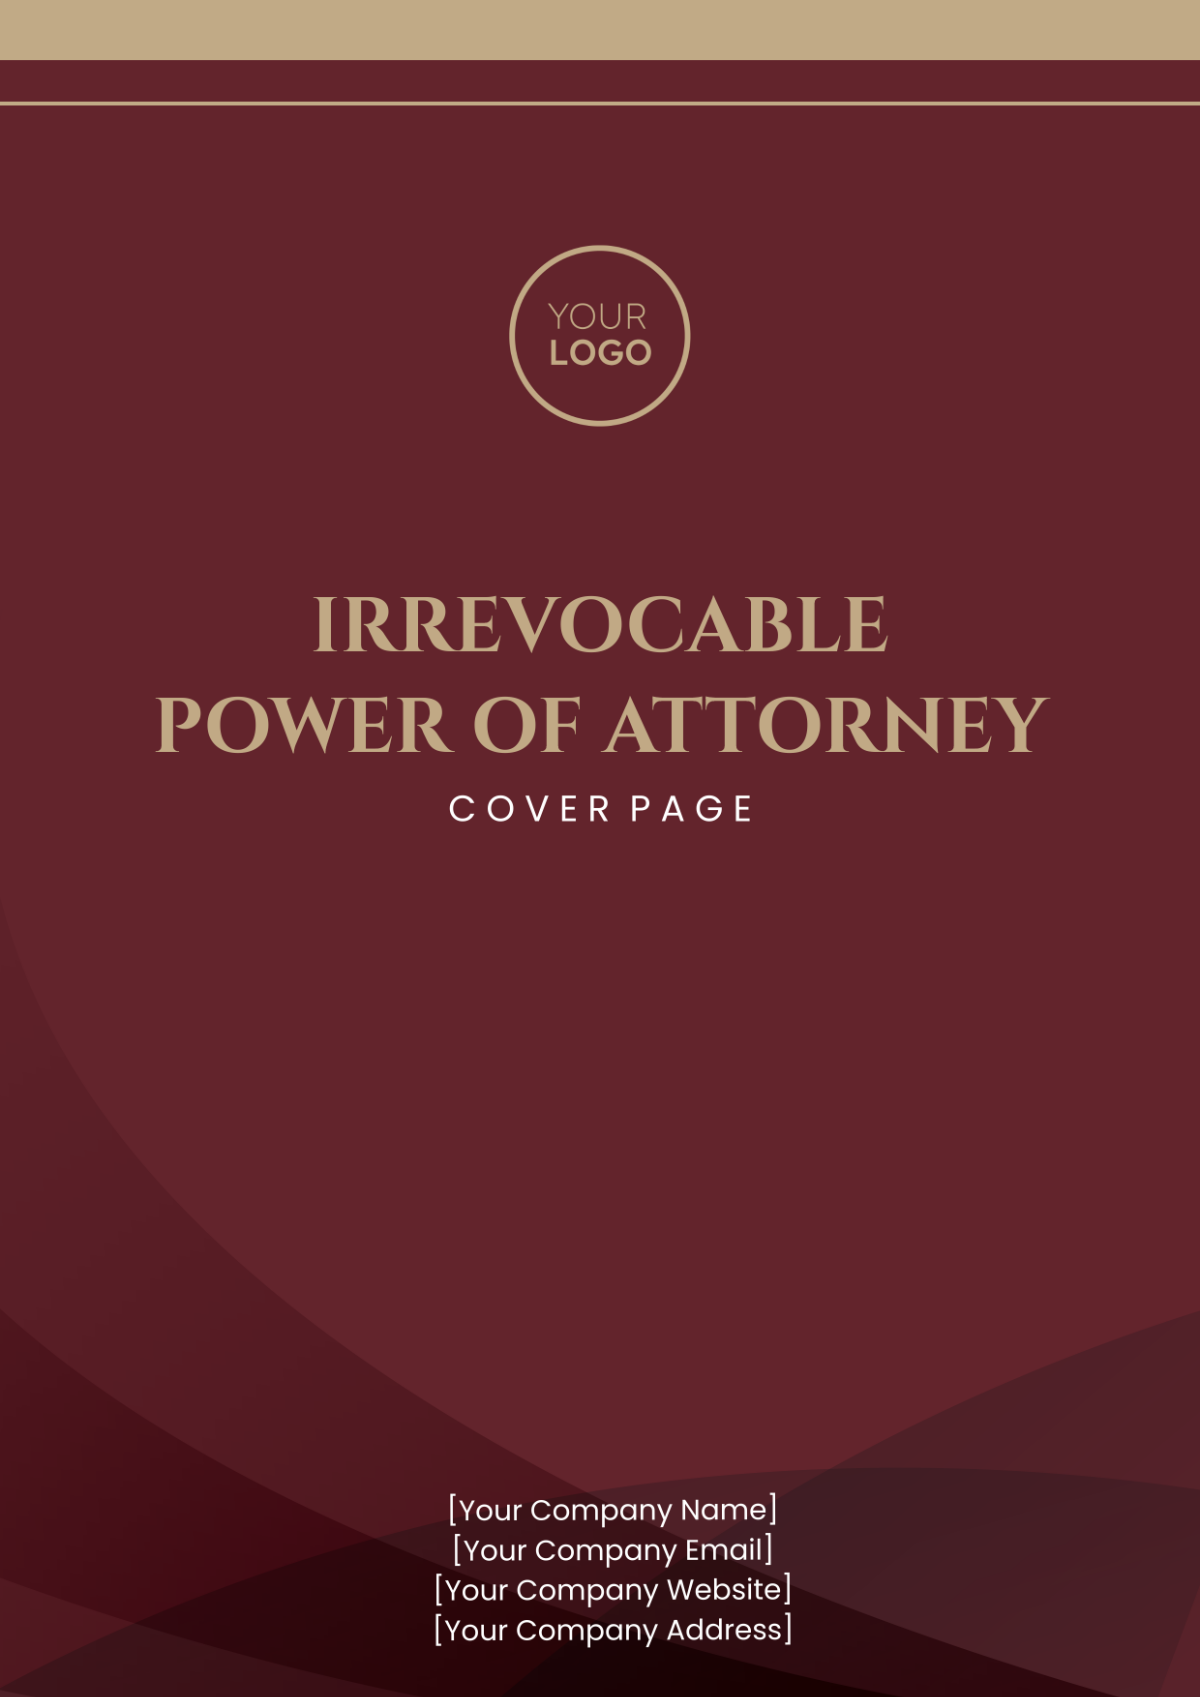 Irrevocable Power of Attorney Cover Page